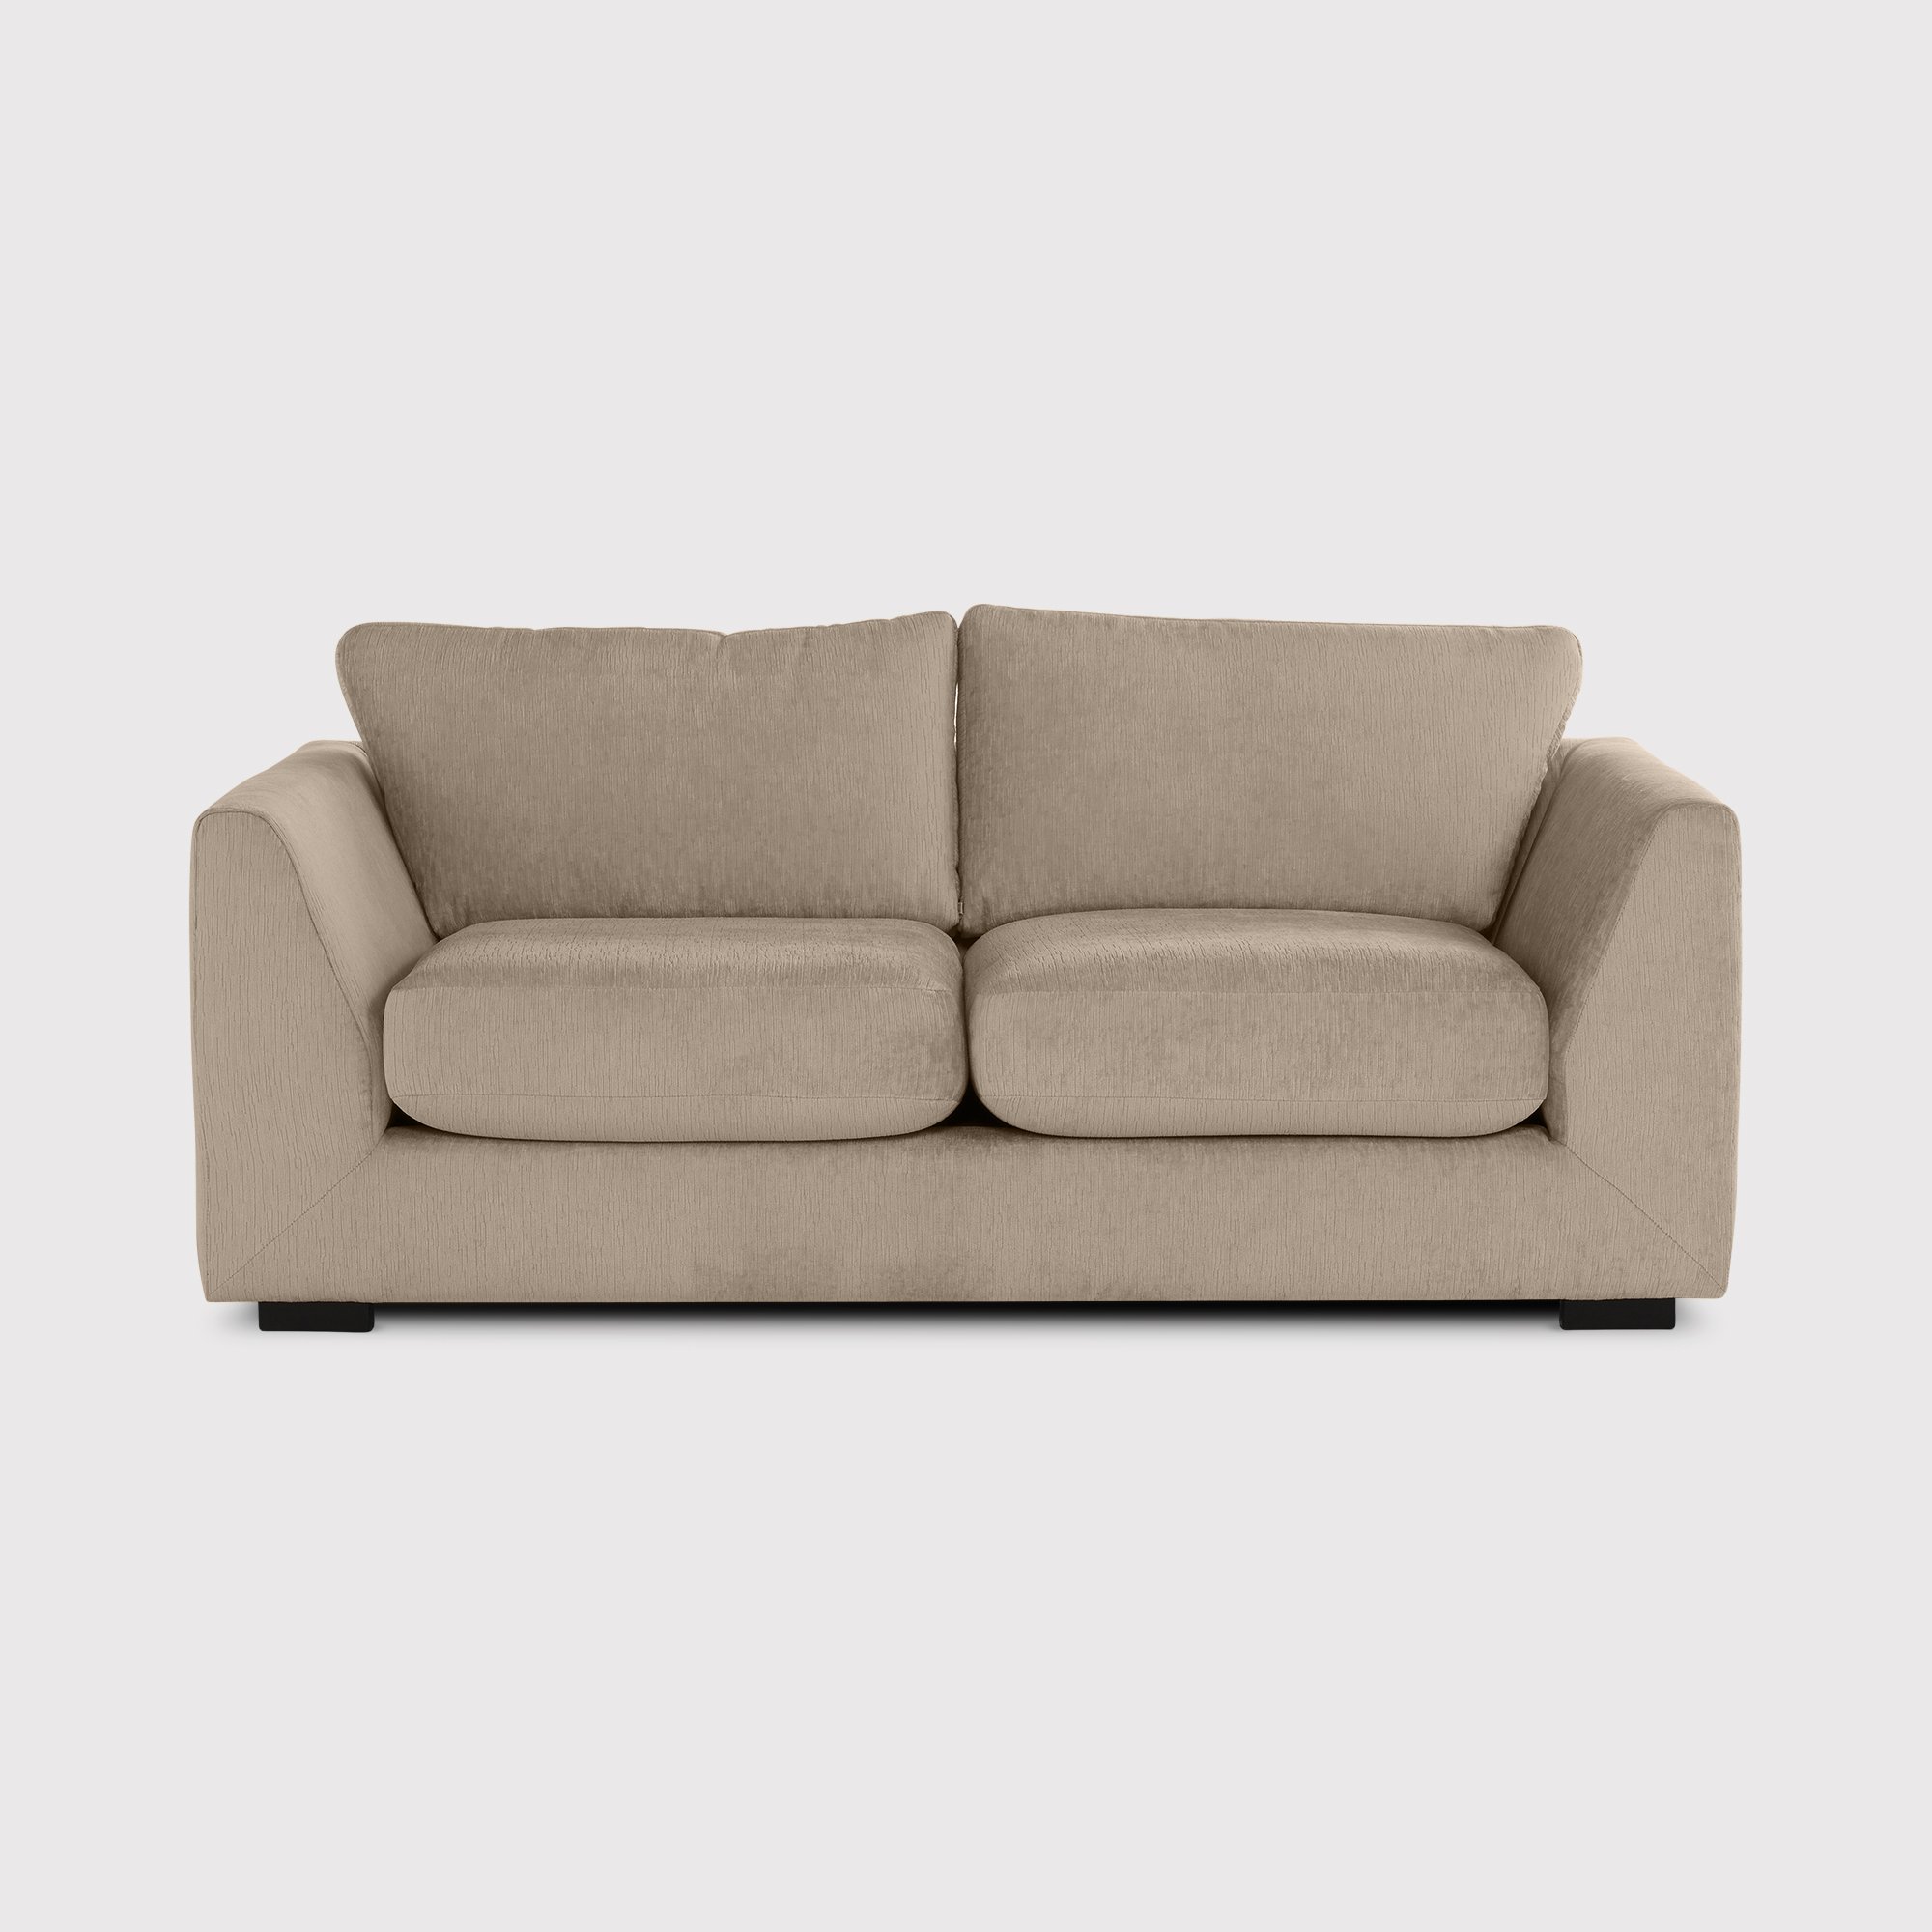 Melby 2 Seater Sofa | Barker & Stonehouse